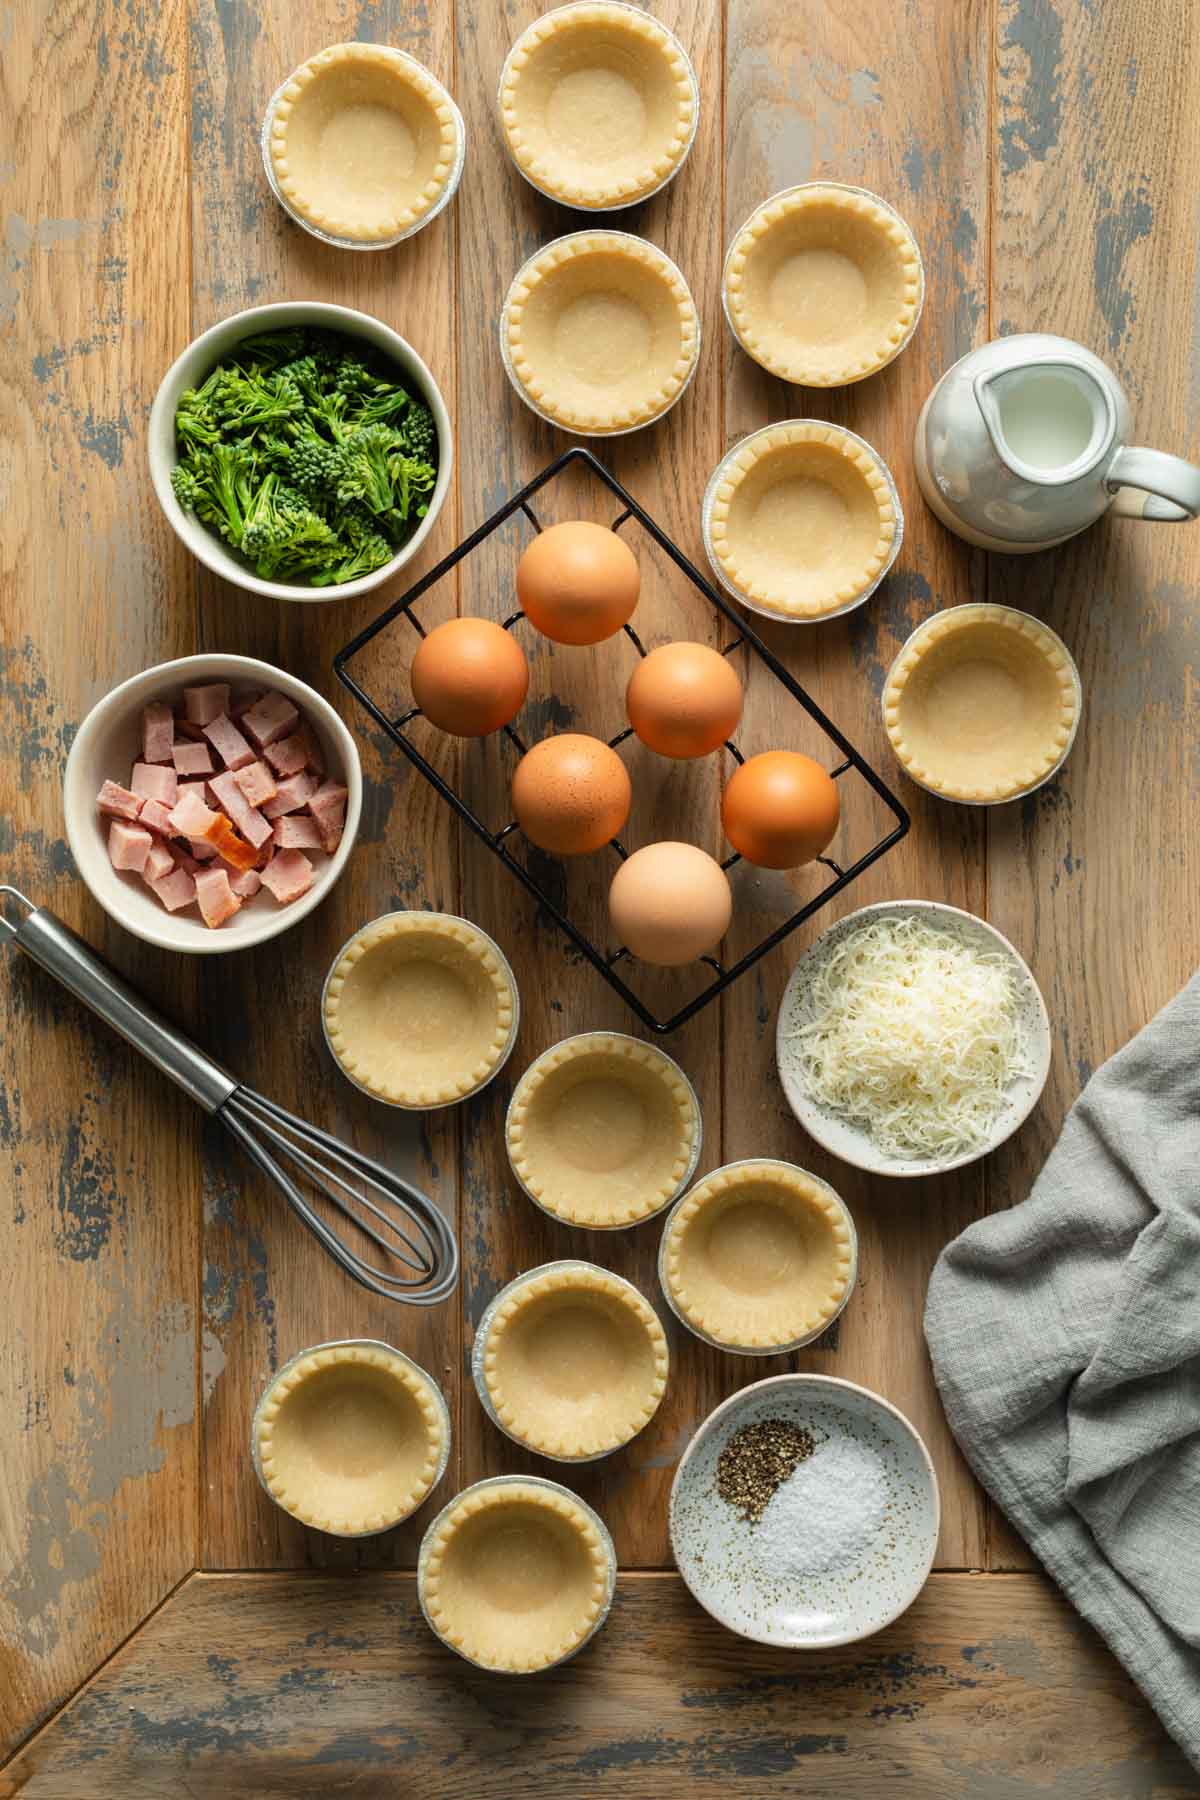 Ingredients to make air fryer quiche arranged individually on a wooden surface.